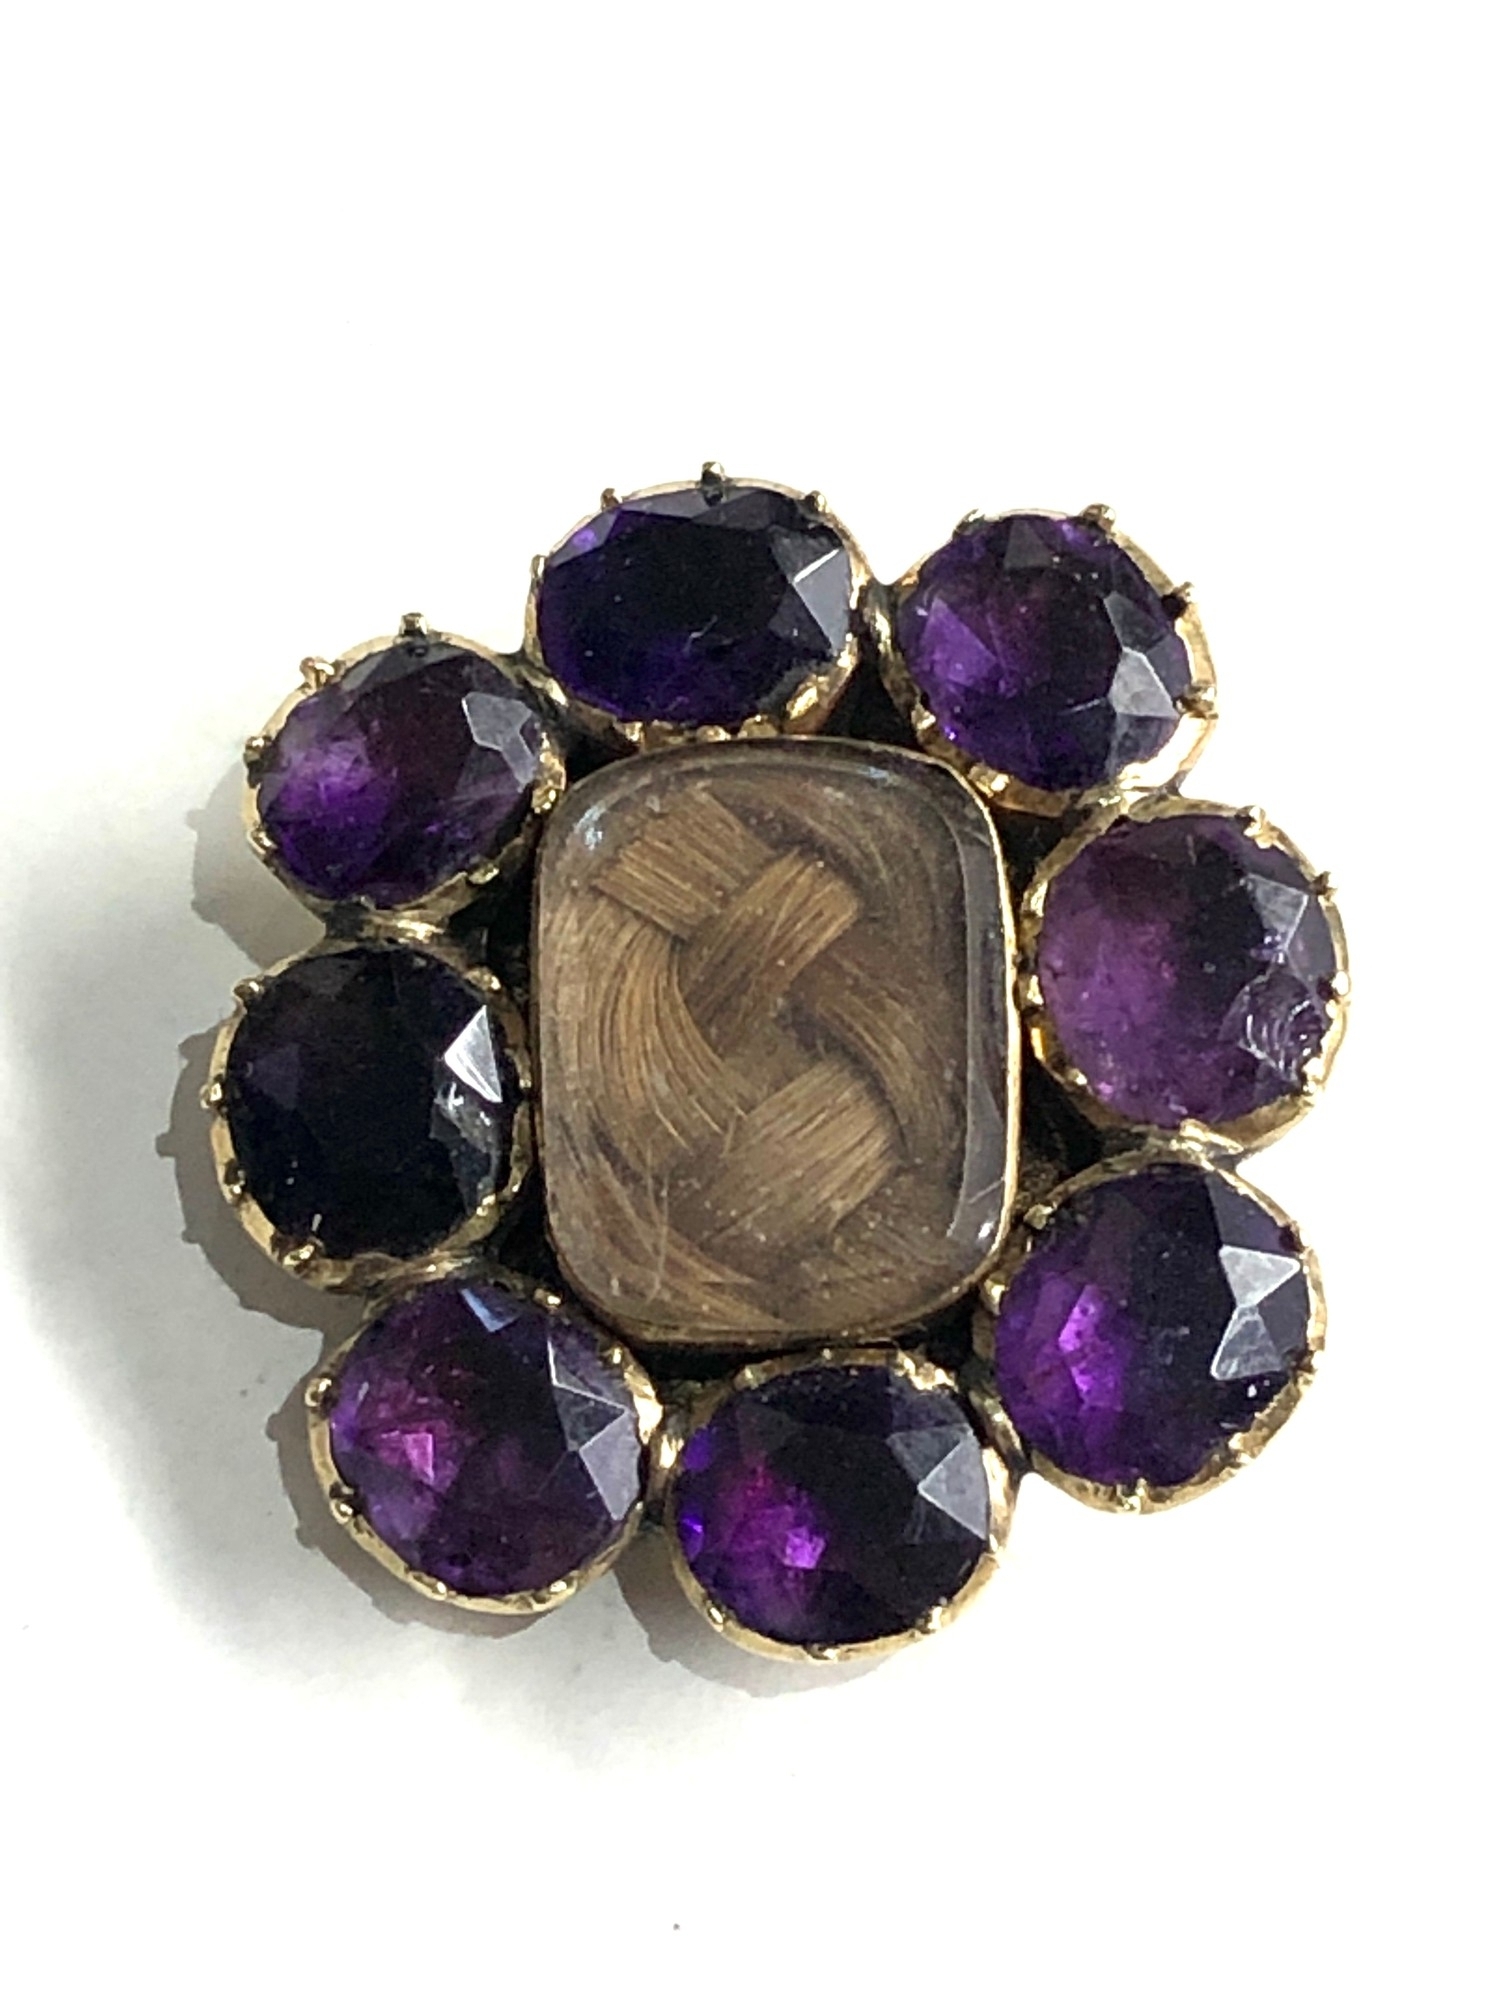 Antique georgian gold amethyst mourning brooch measures approx 2.4cm by 2.2cm weight 5g - Image 2 of 3